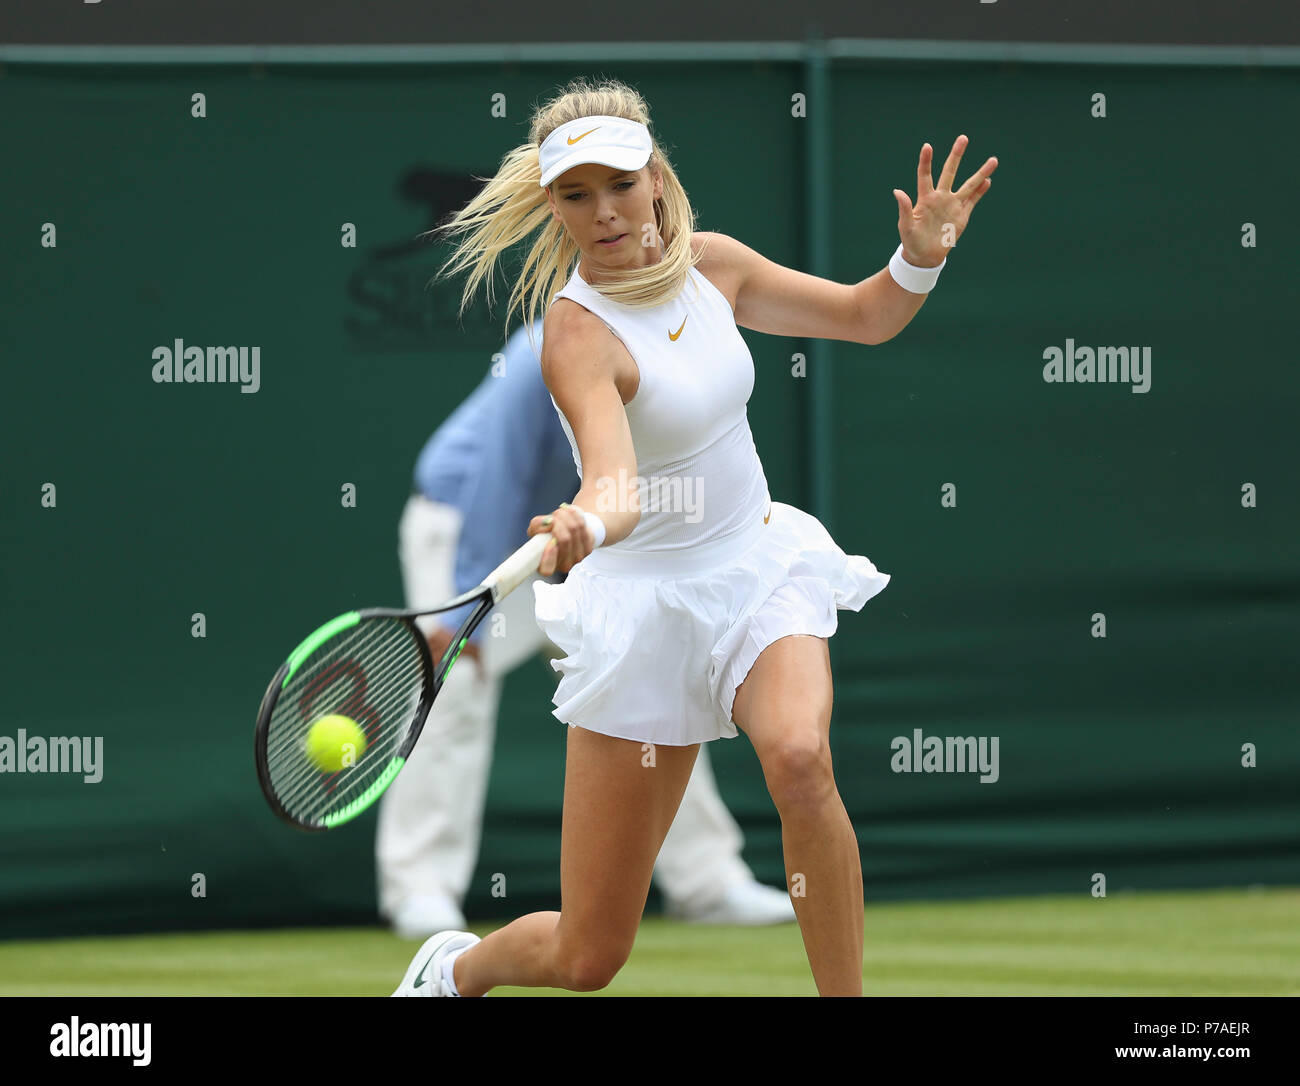 London, UK. All England Lawn Tennis and Croquet Club, London, England; The  Wimbledon Tennis Championships, Day 4; Katie Boulter (GBR) plays a forehand  shot during her second round match against Naomi Osaka (